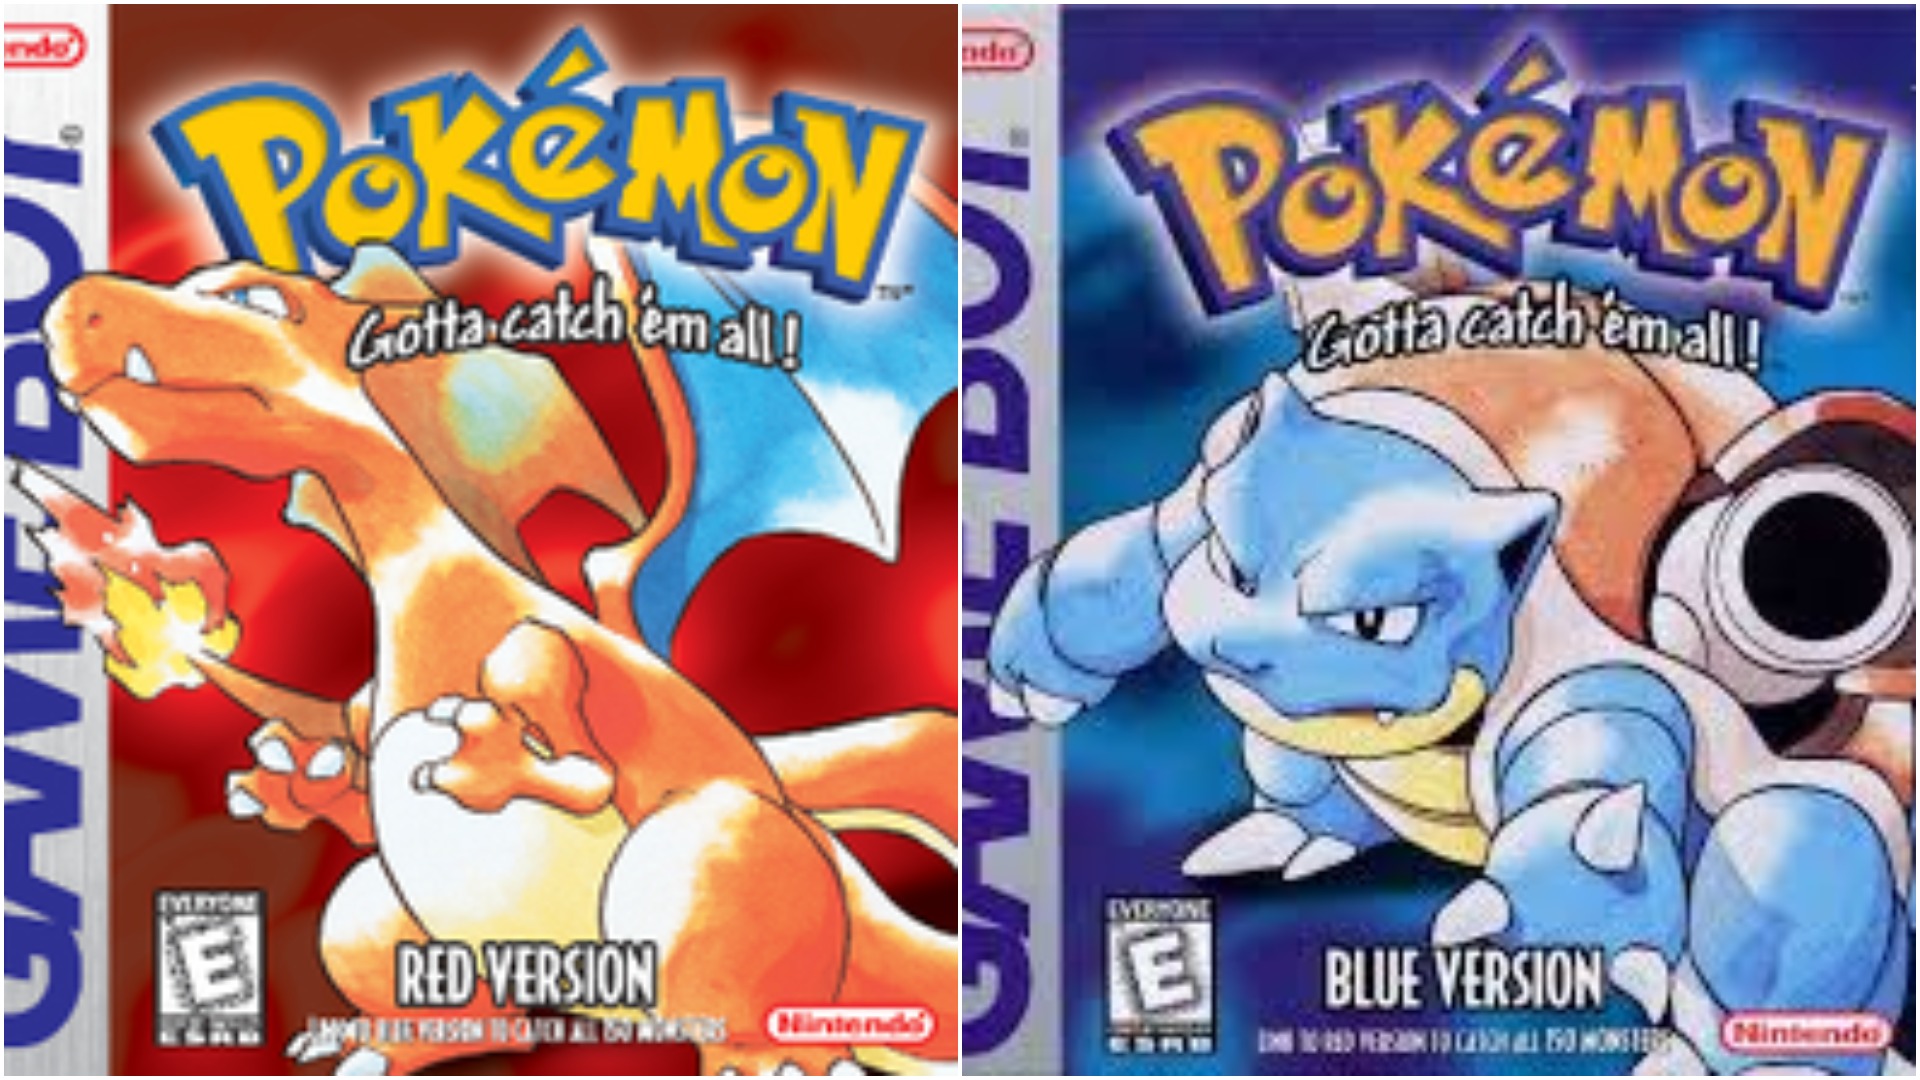 The Complete Pokémon Games List in Order